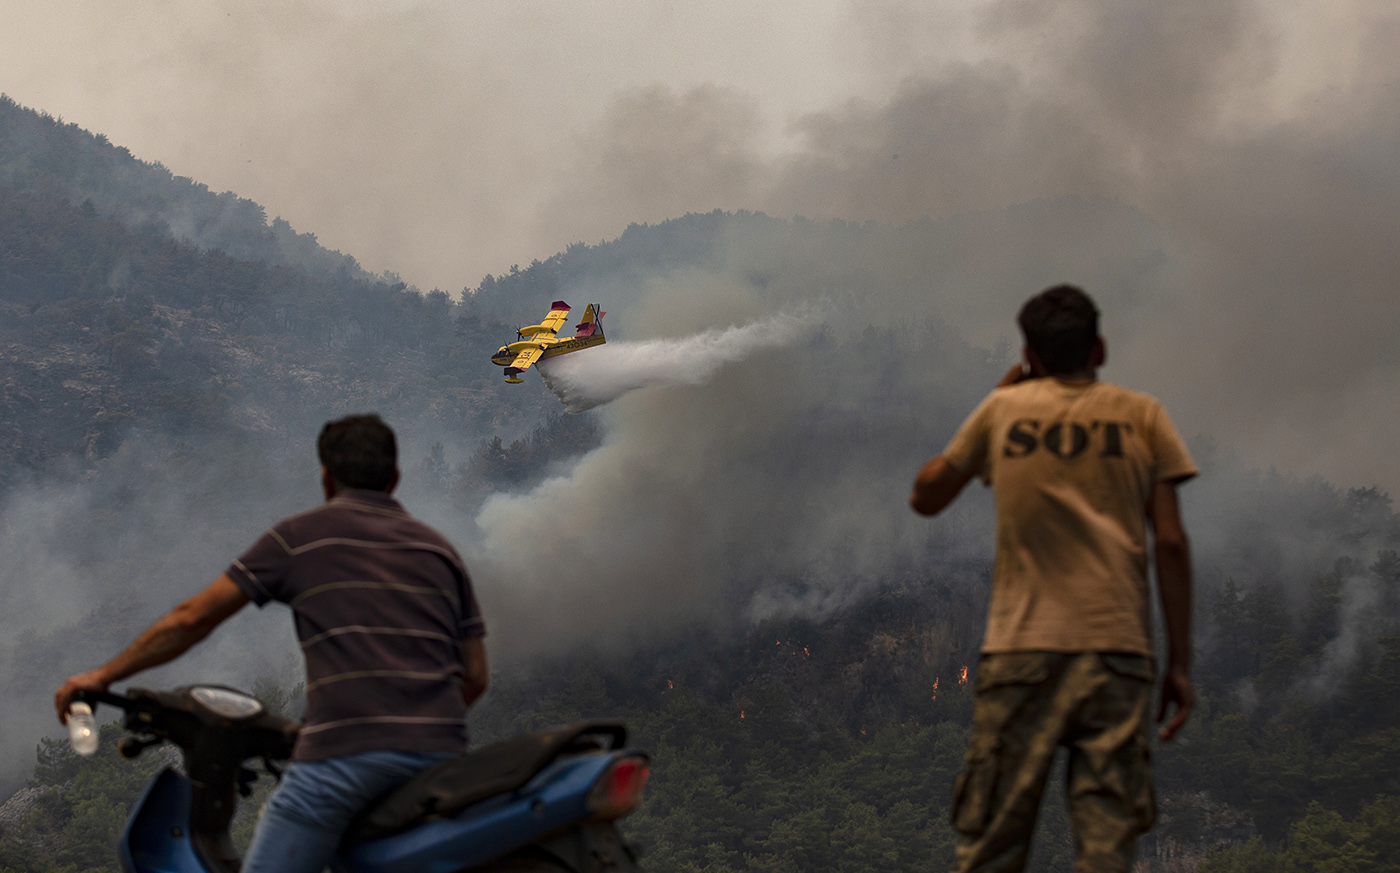 Spanish hydroplanes waterbombs a wildfire burning as people watch near the Yuvarlakcay village of Koycegiz district of Mugla, Turkey, 04 August 2021. Turkish Health minister Fahrettin Koca confirmed that eight people have lost their lives due to the wildfires raging in Turkey’s Mediterranean towns.